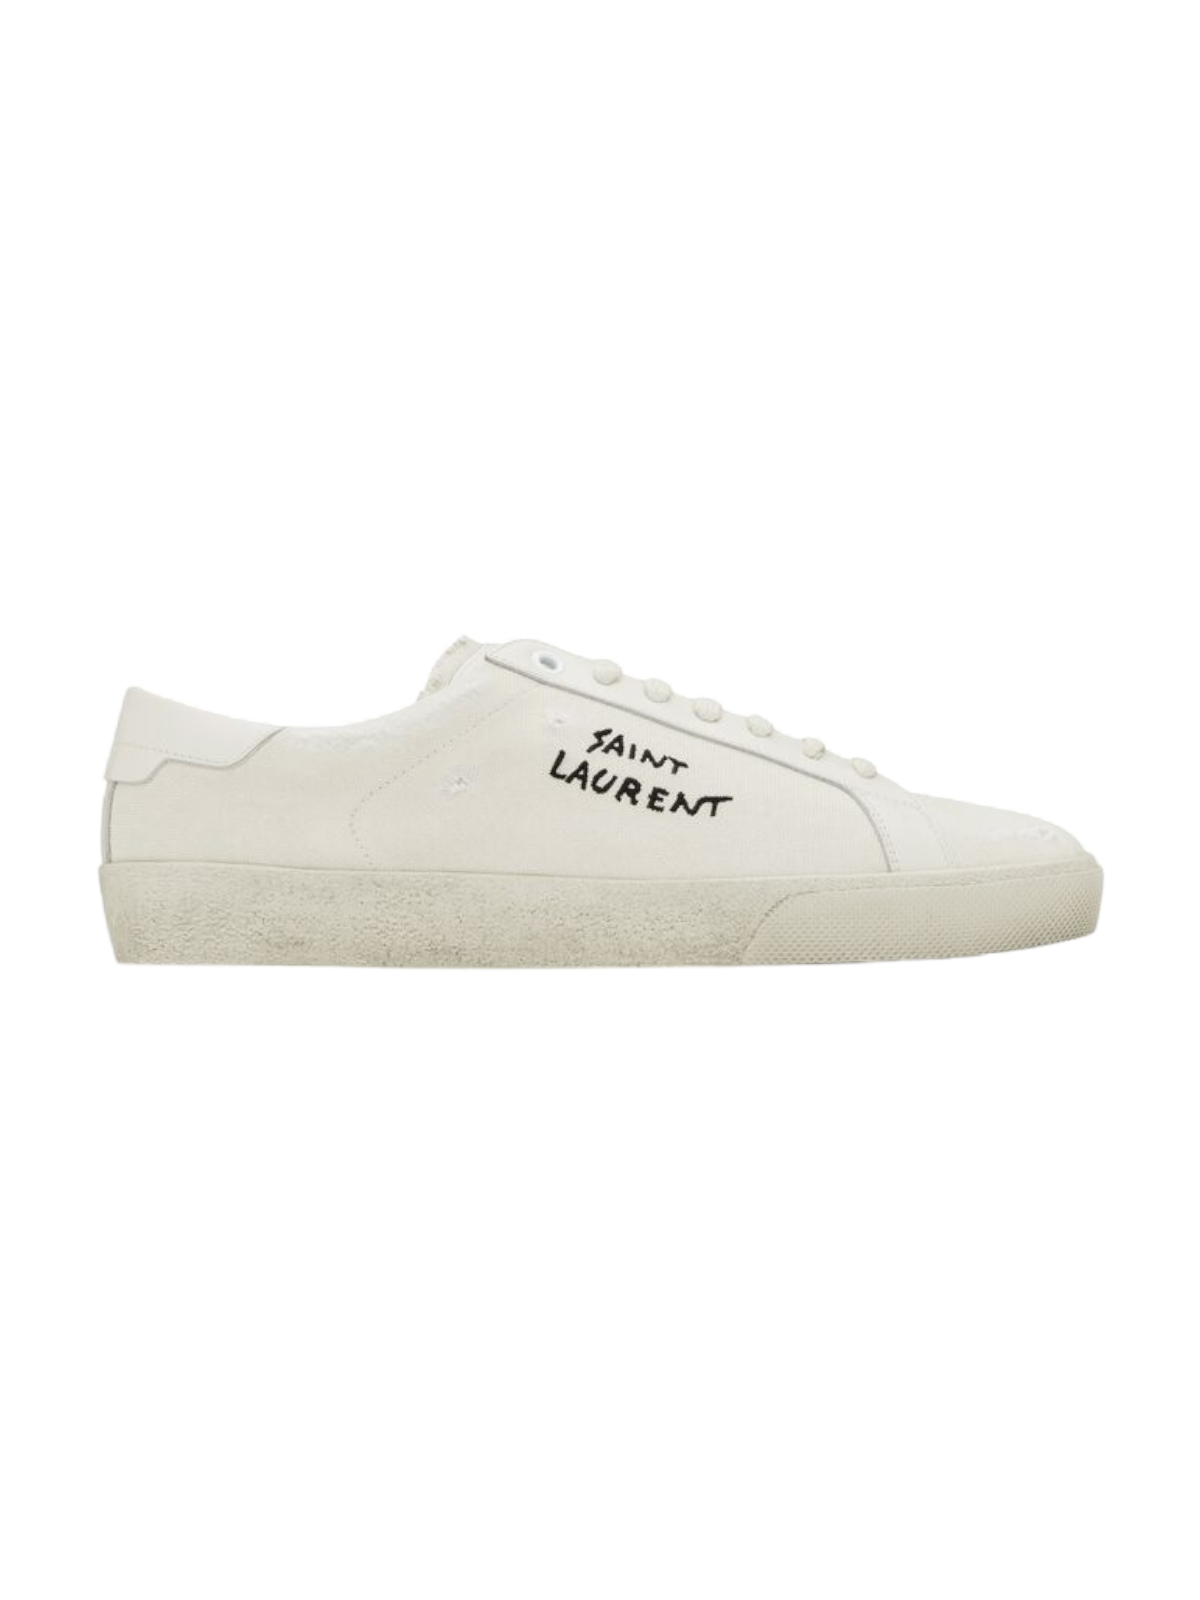 Saint Laurent Court Classic SL/06 Embroidered Sneakers